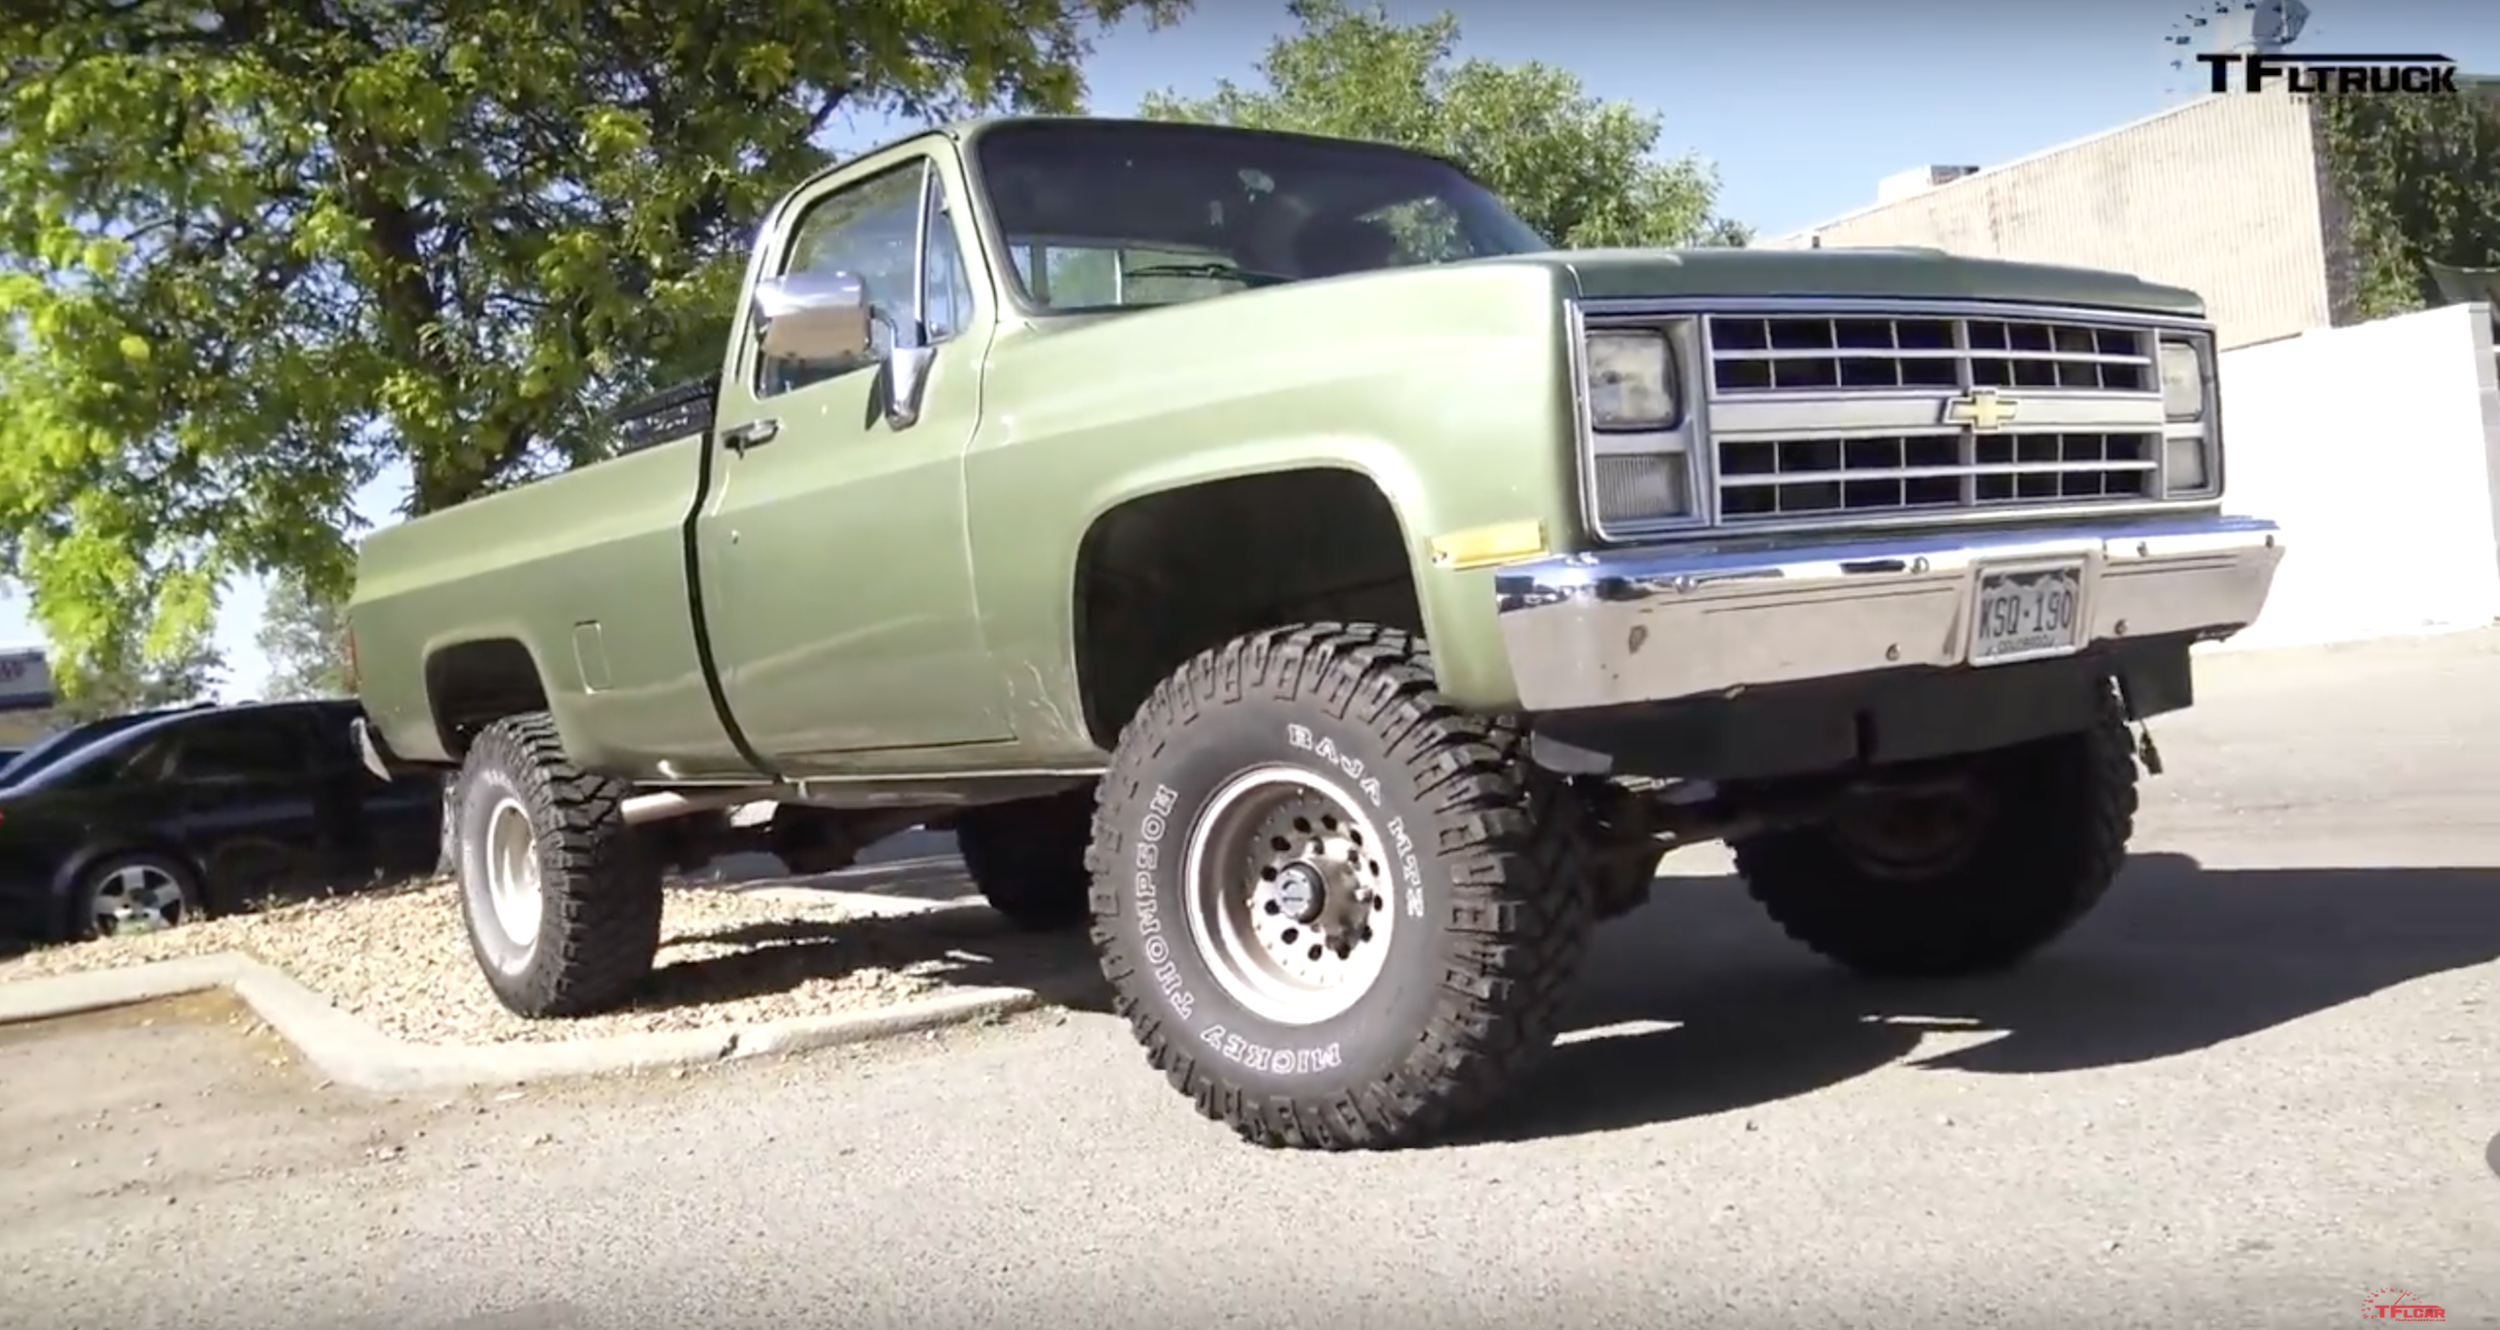 Chevy K10 Named Big Green Is A Hulking Badass Dragster